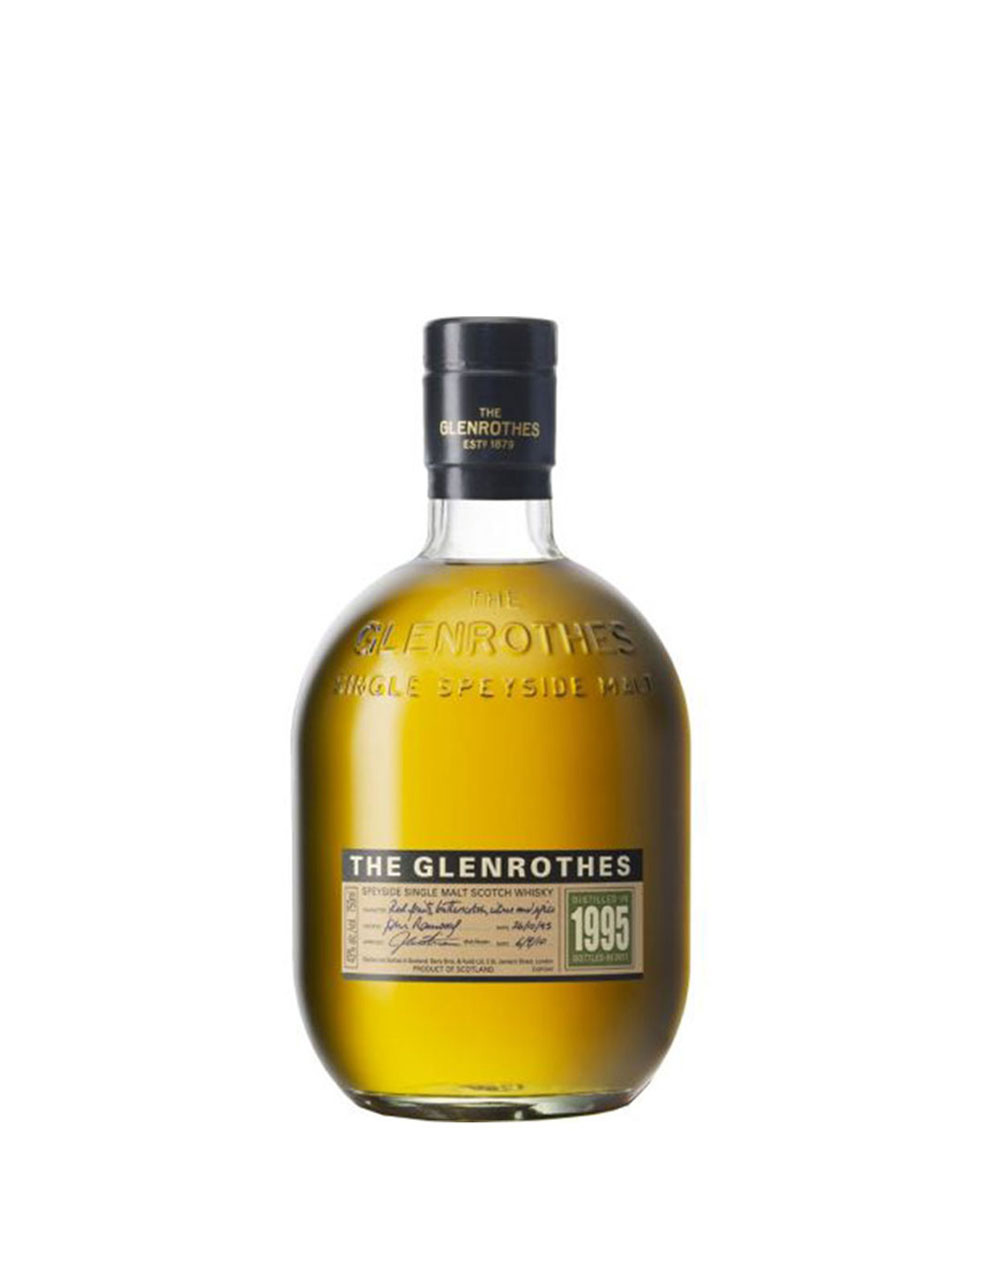 The Glenrothes 1995 Vintage